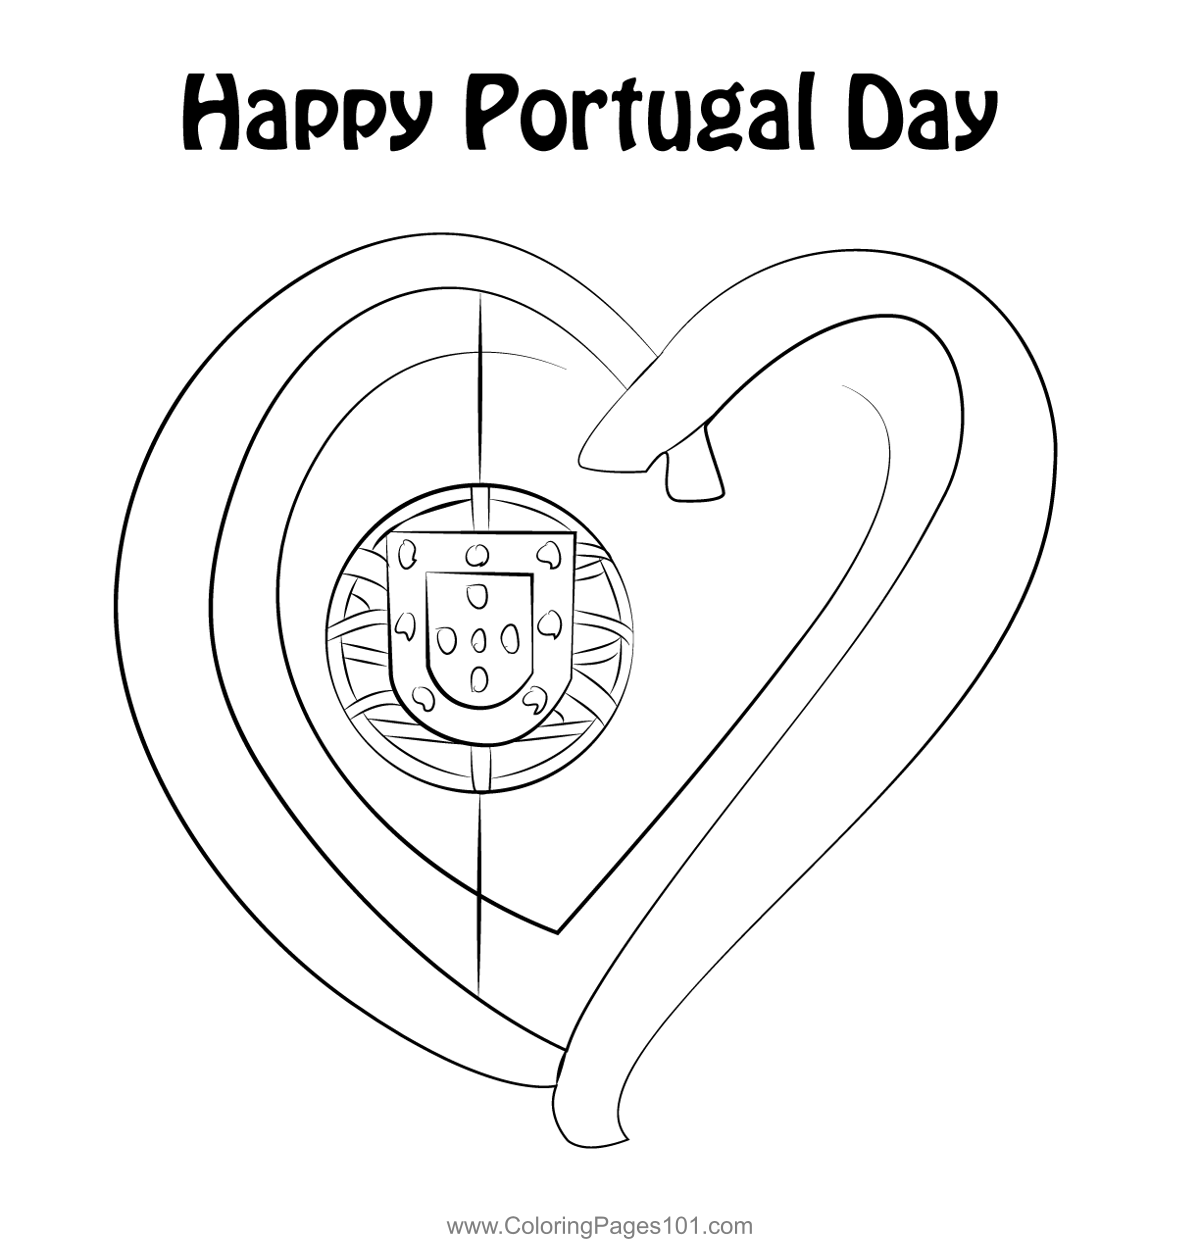 Enjoy portugal day coloring page